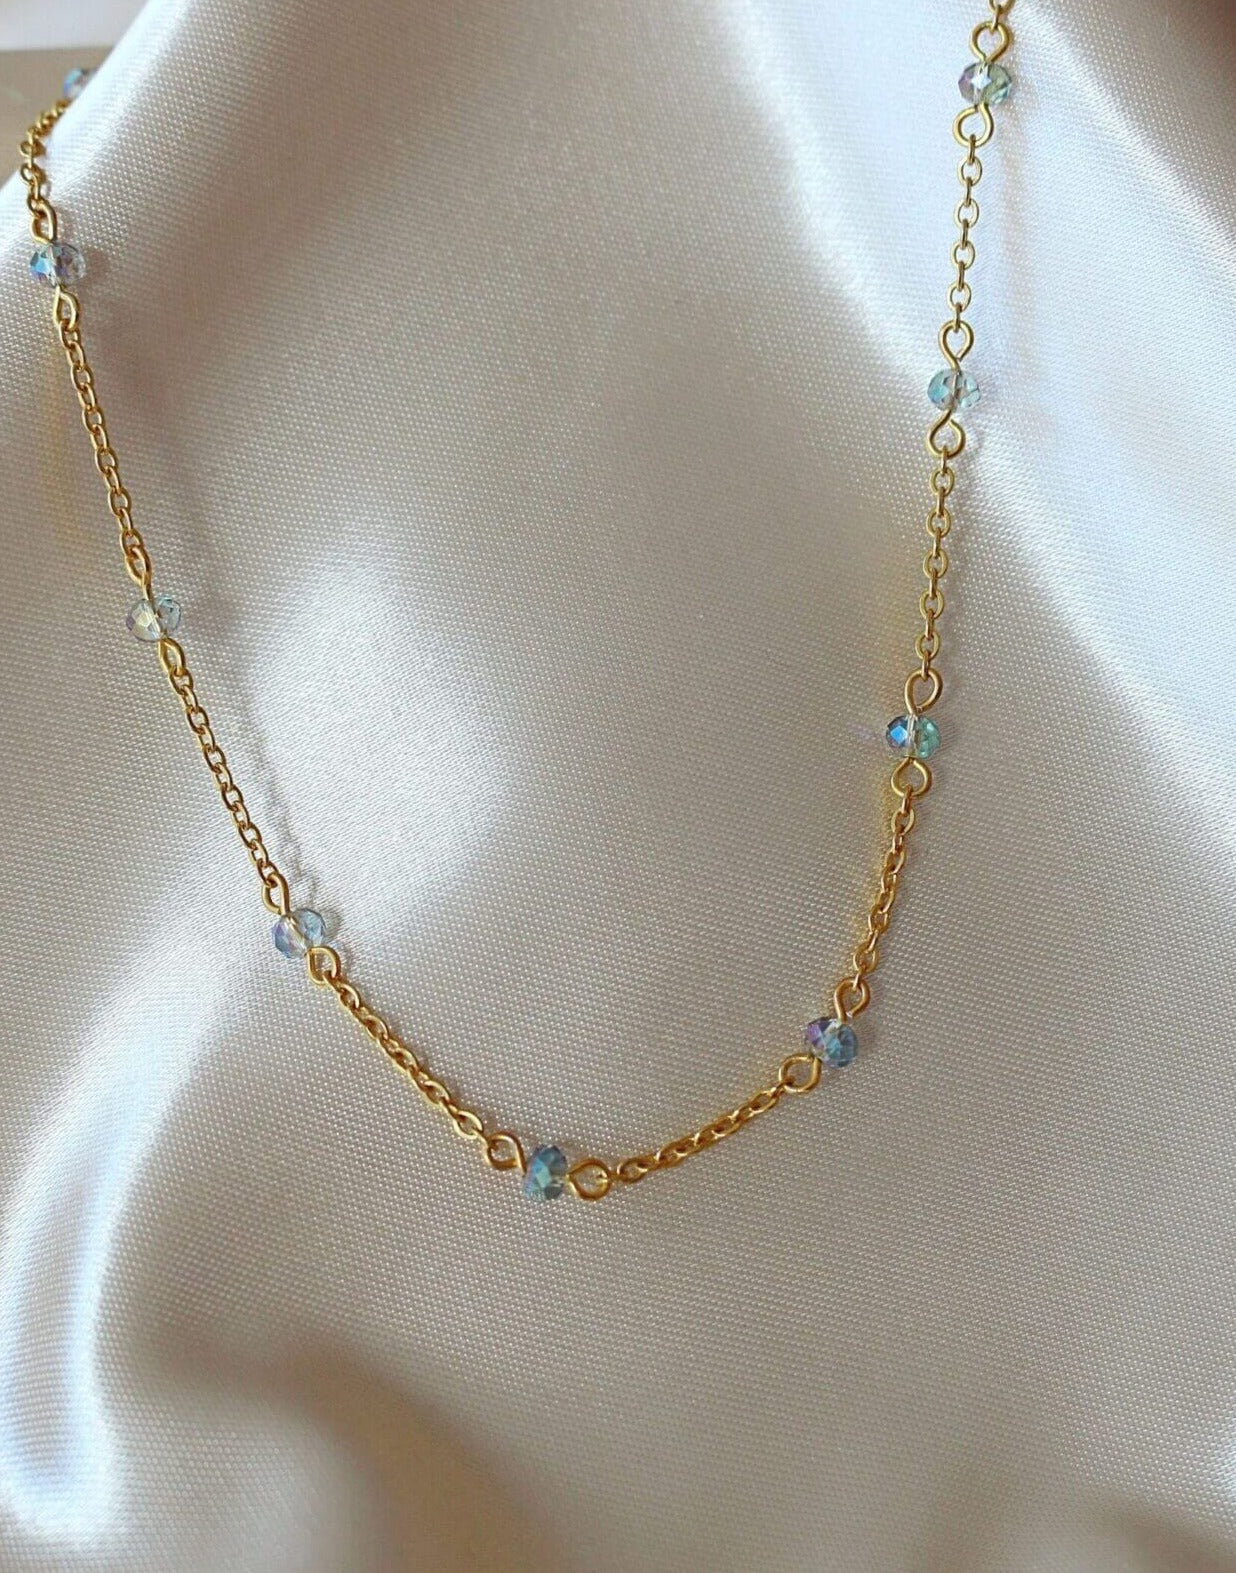 Crystal necklace - choker - 18k gold plated